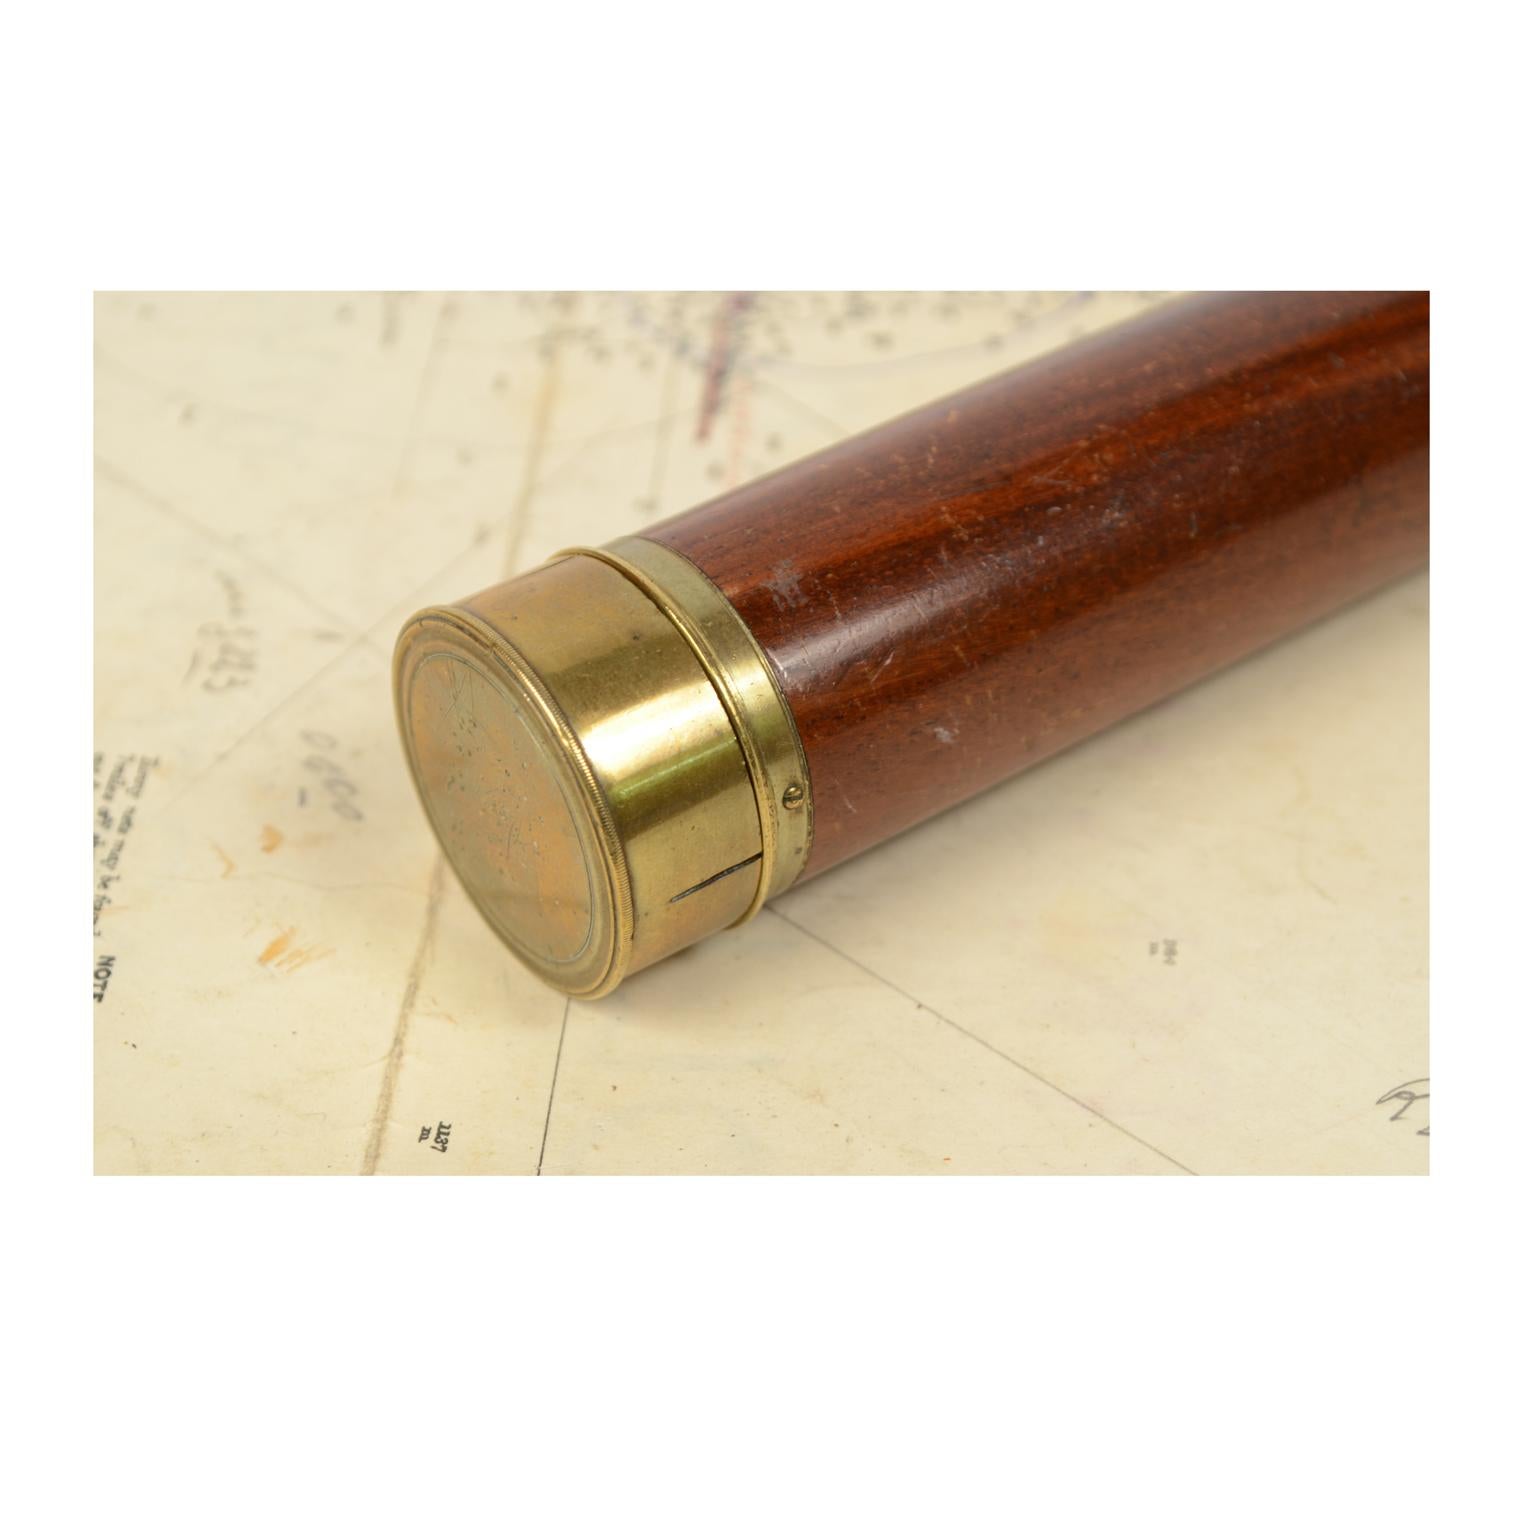 Brass Telescope with Mahogany Wooden Handle Made in UK in circa 1840 1